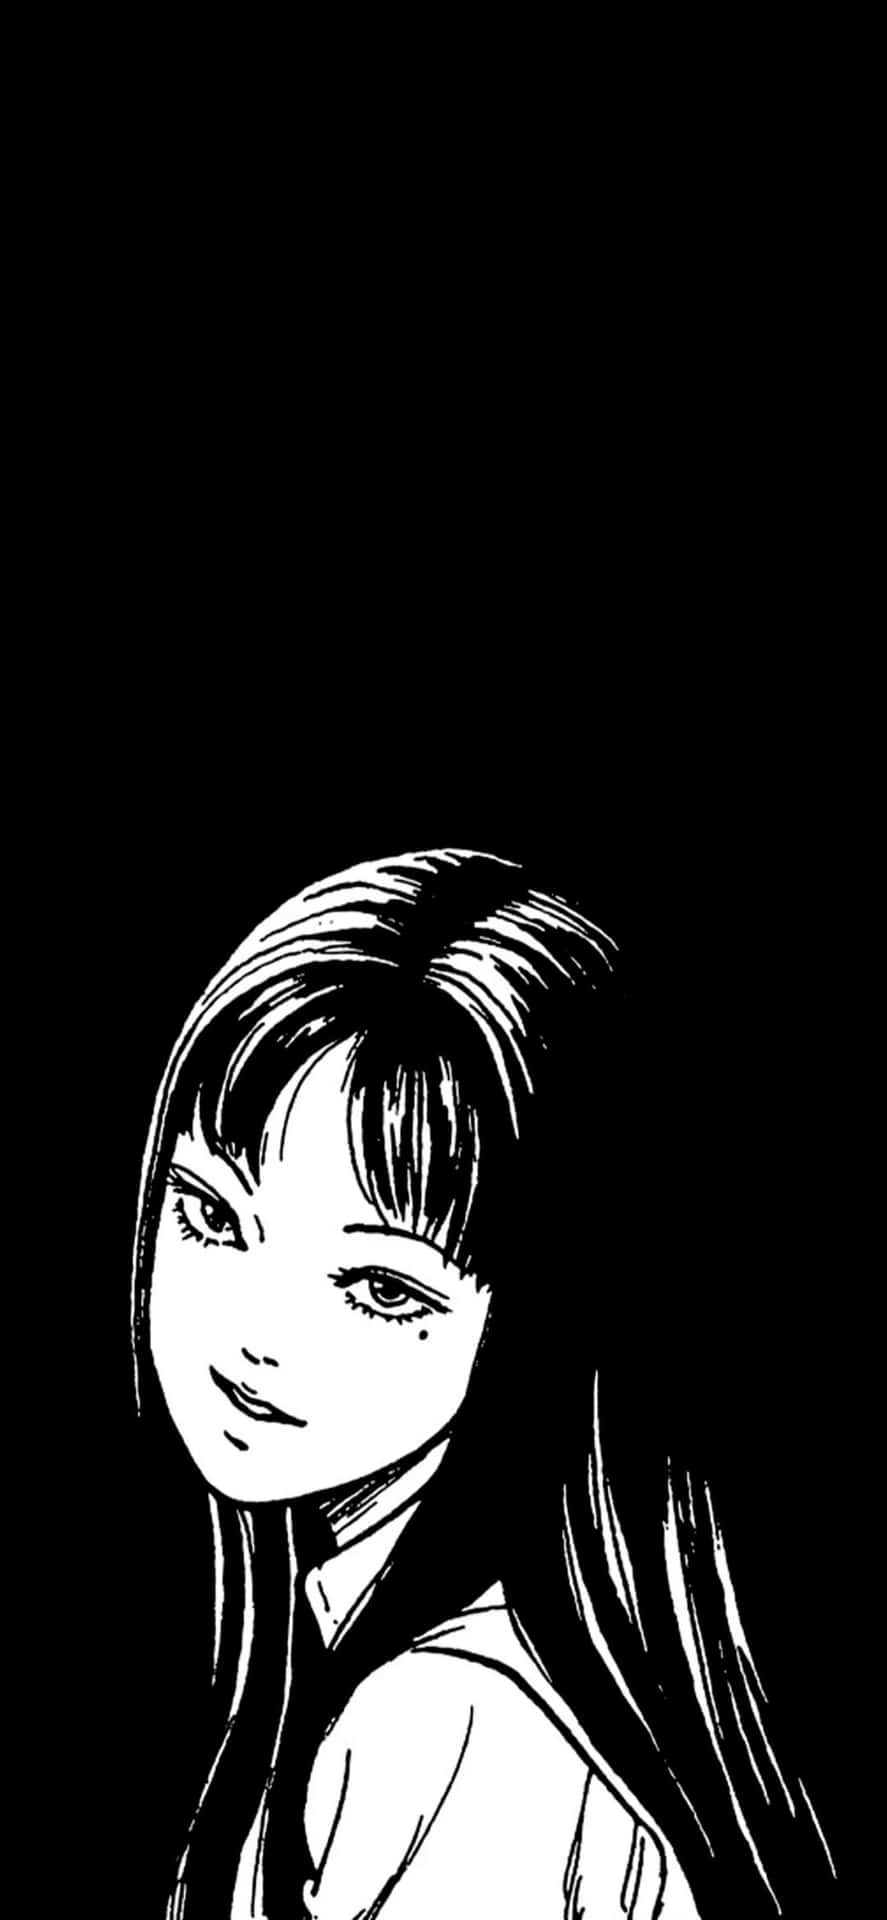 Download Tomie With Long Hair Wallpaper | Wallpapers.com